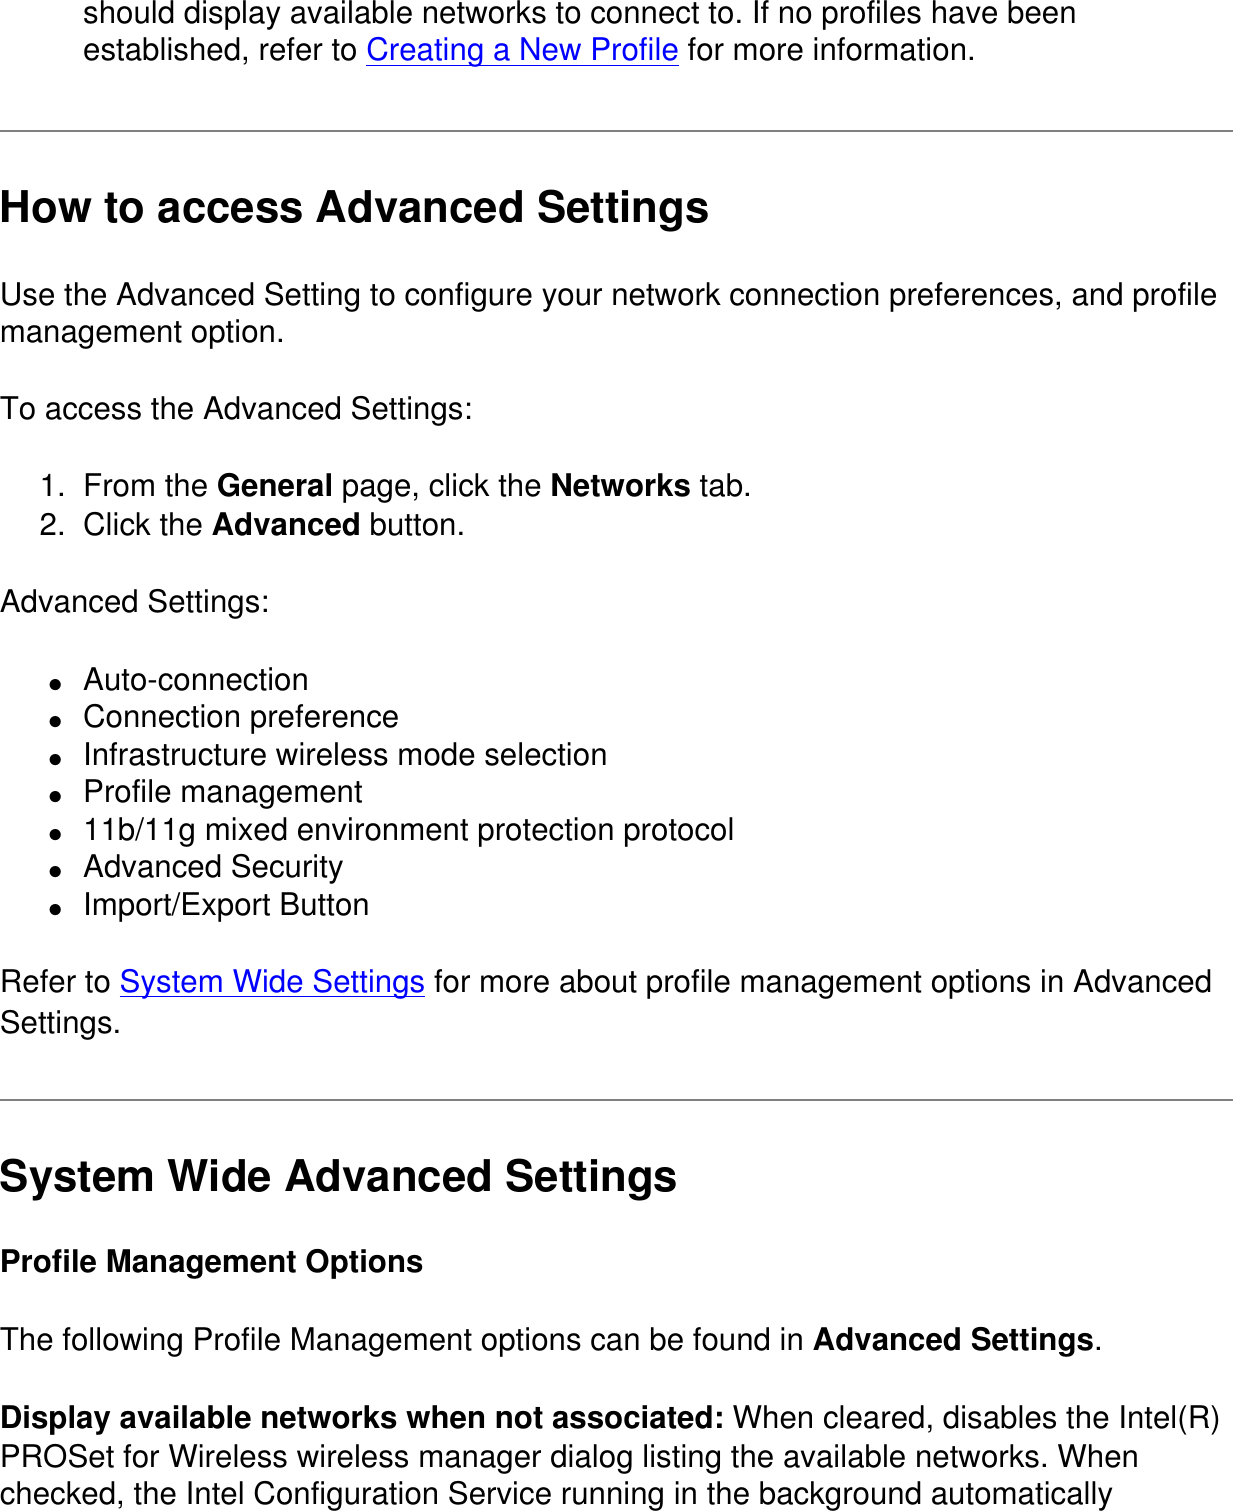 should display available networks to connect to. If no profiles have been established, refer to Creating a New Profile for more information.How to access Advanced SettingsUse the Advanced Setting to configure your network connection preferences, and profile management option. To access the Advanced Settings:1.  From the General page, click the Networks tab.2.  Click the Advanced button.Advanced Settings:●     Auto-connection●     Connection preference●     Infrastructure wireless mode selection  ●     Profile management●     11b/11g mixed environment protection protocol●     Advanced Security●     Import/Export ButtonRefer to System Wide Settings for more about profile management options in Advanced Settings. System Wide Advanced SettingsProfile Management OptionsThe following Profile Management options can be found in Advanced Settings.Display available networks when not associated: When cleared, disables the Intel(R) PROSet for Wireless wireless manager dialog listing the available networks. When checked, the Intel Configuration Service running in the background automatically 